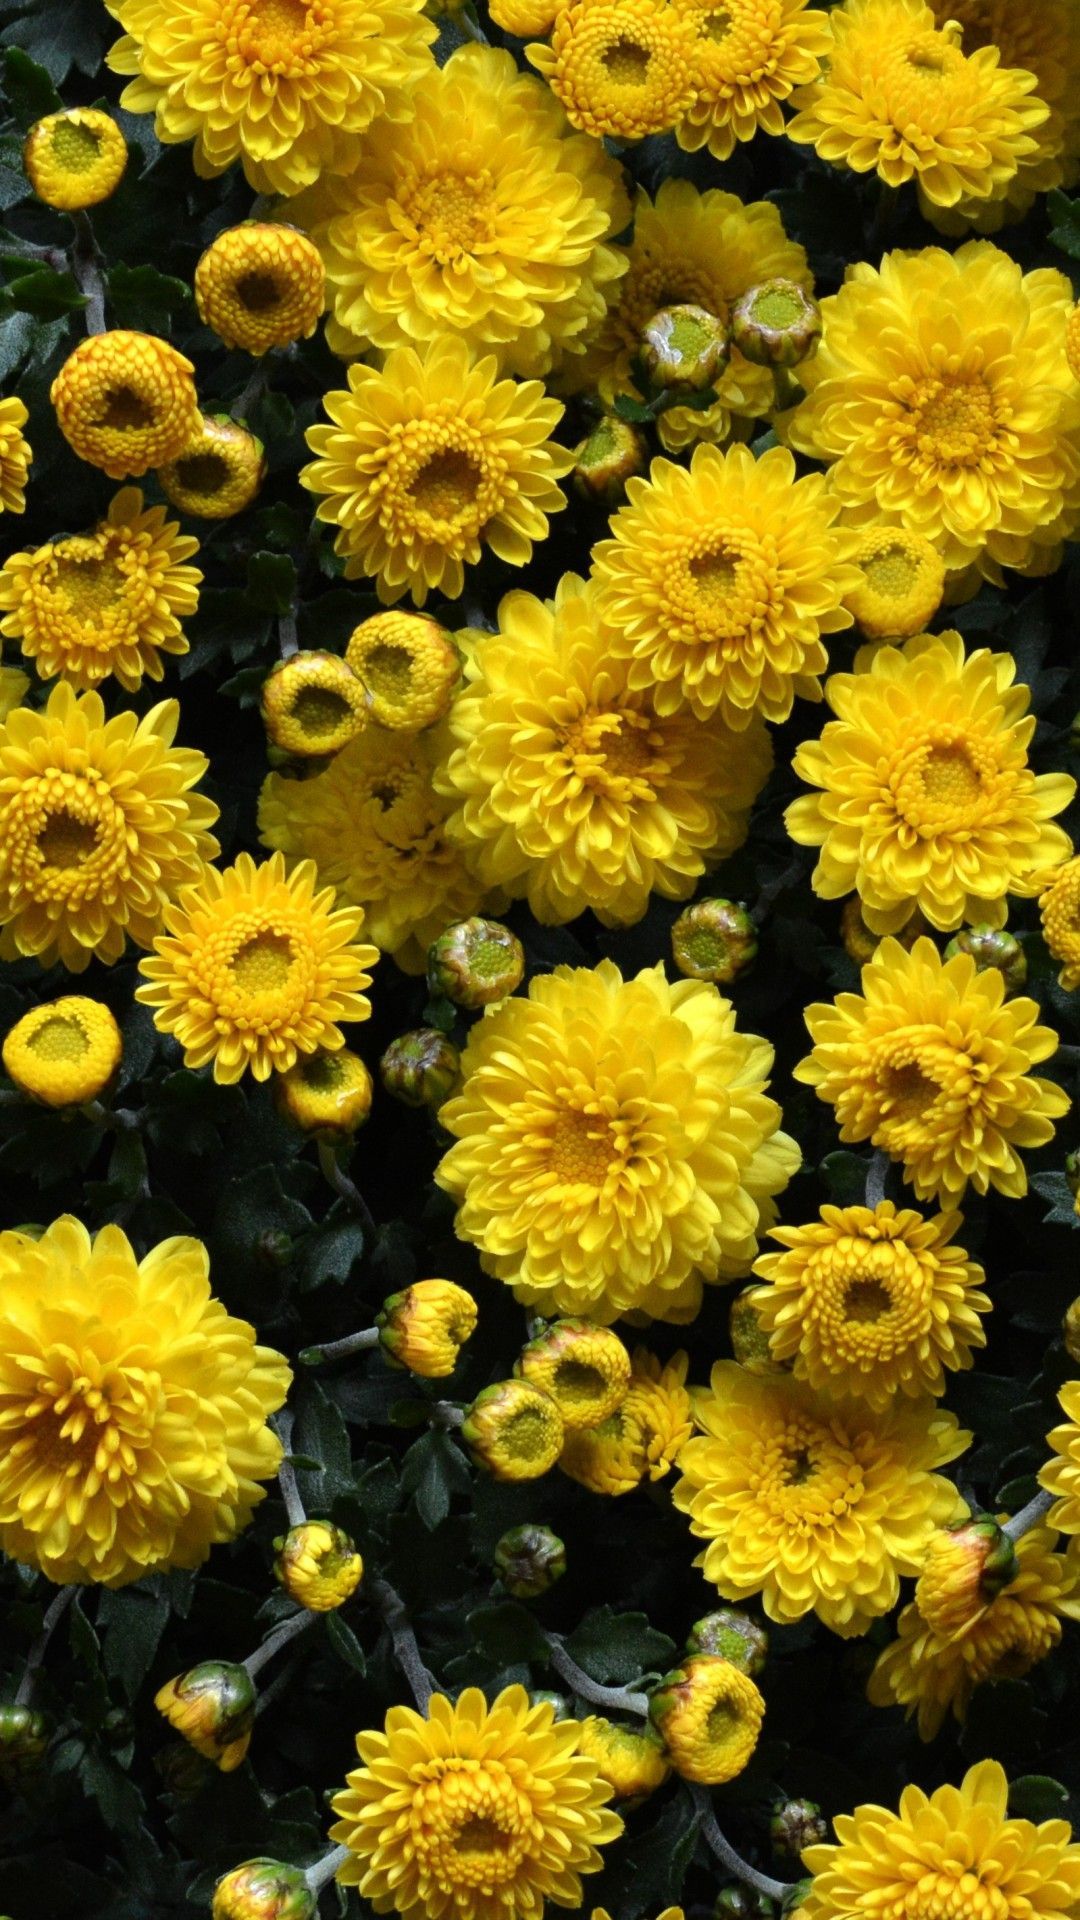 Yellow Flowers iPhone Wallpaper For iPhone Is 4K Wallpaper. Flower iphone wallpaper, Yellow flower wallpaper, iPhone background nature